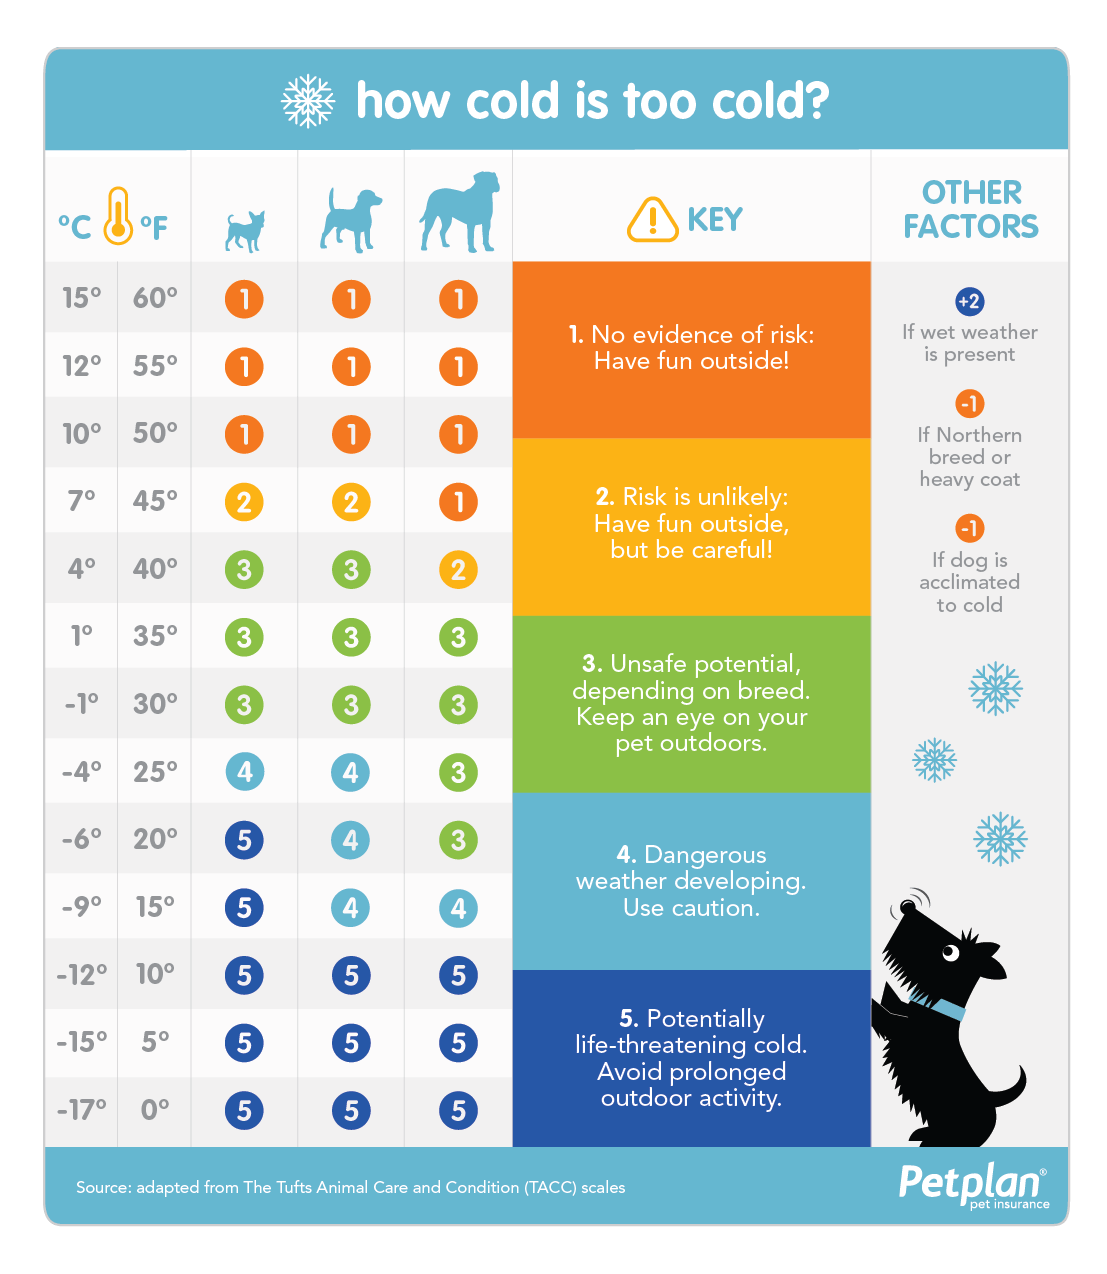 PETP_2245_HowColdIsTooCold_Infographic_0918